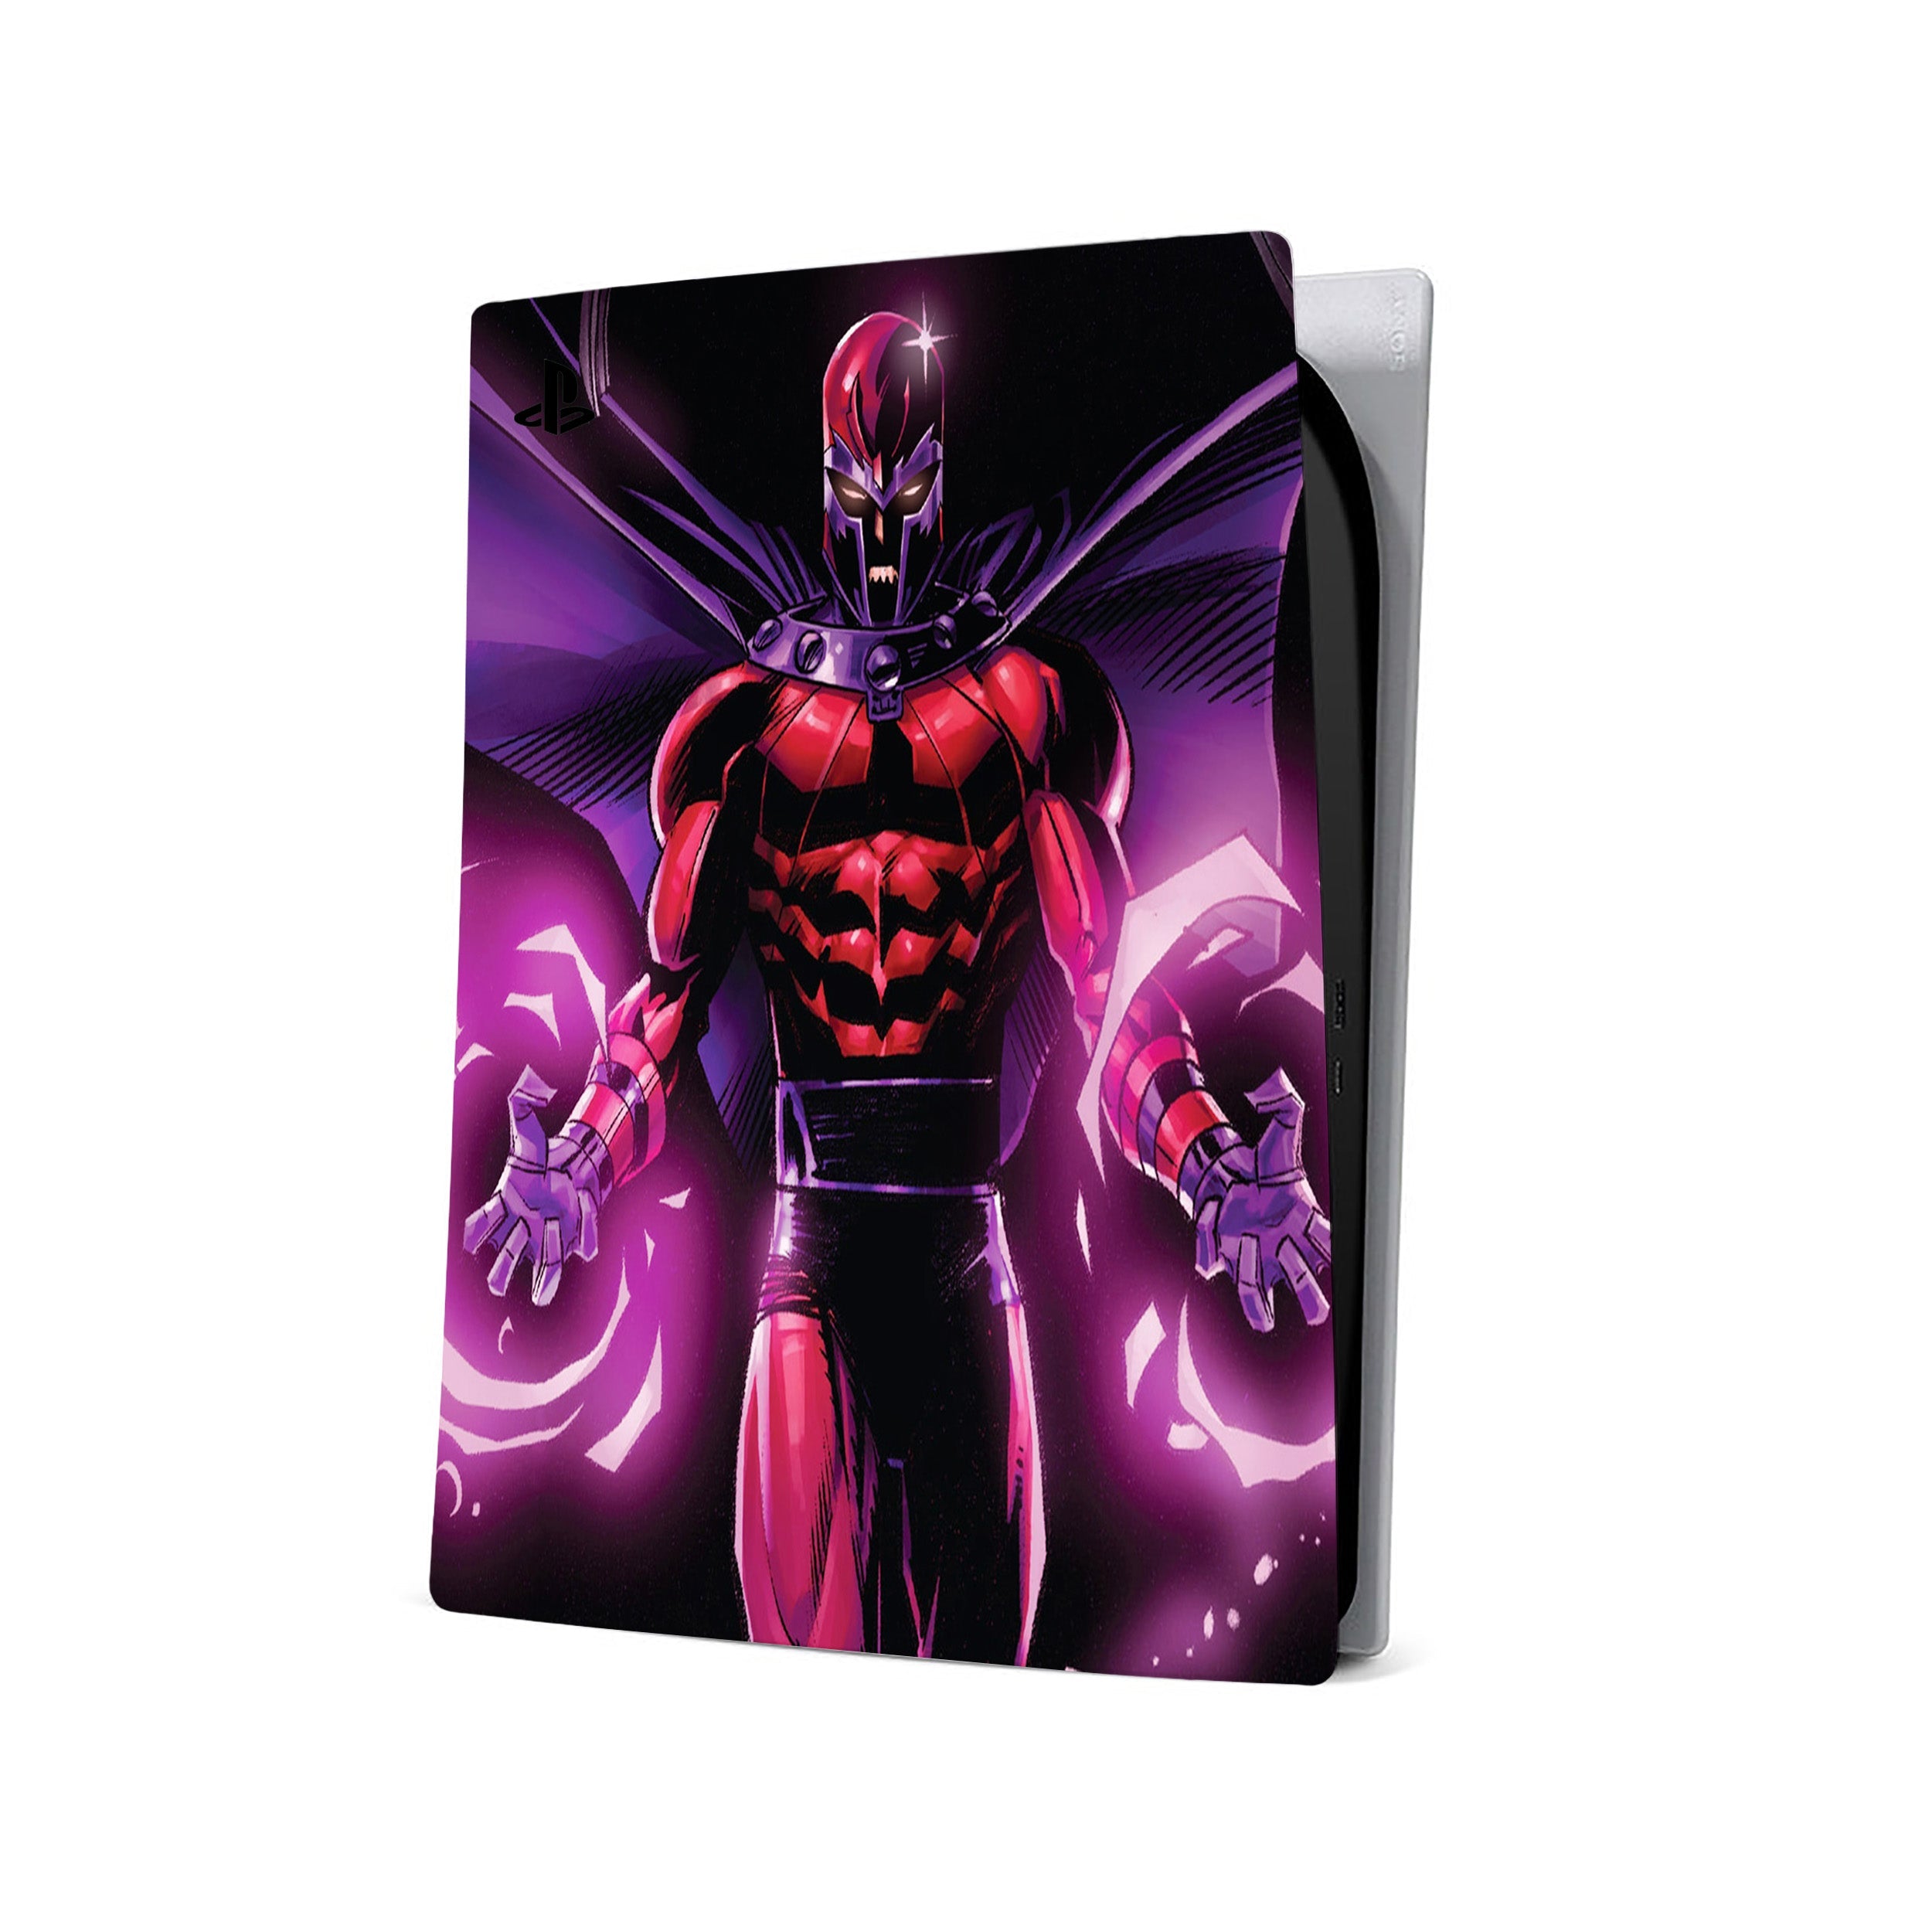 A video game skin featuring a Marvel Comics X Men Magneto design for the PS5.